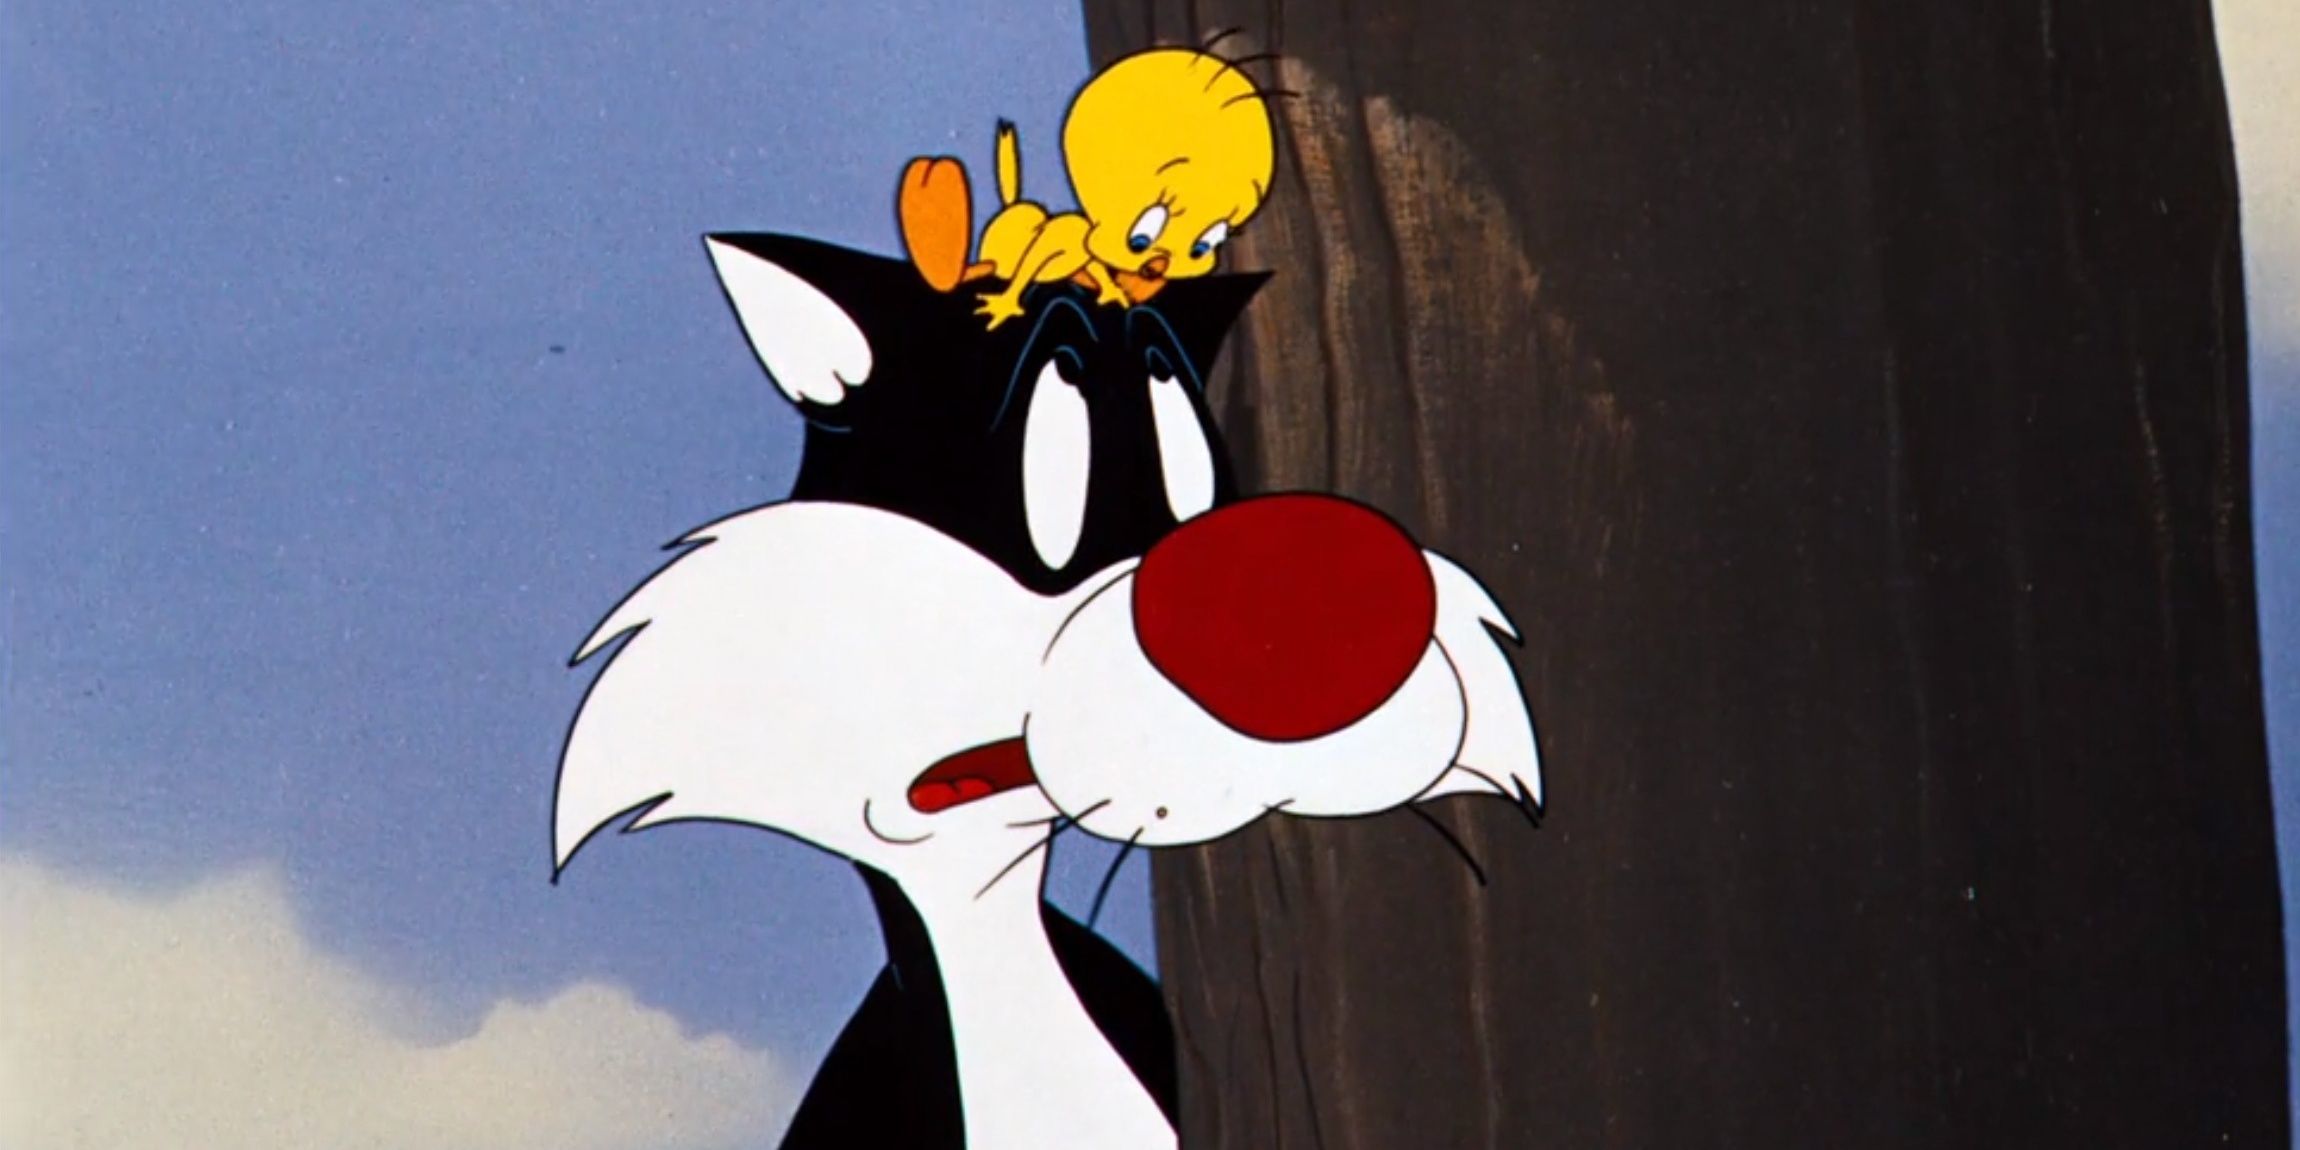 Sylvester and Tweety on his head